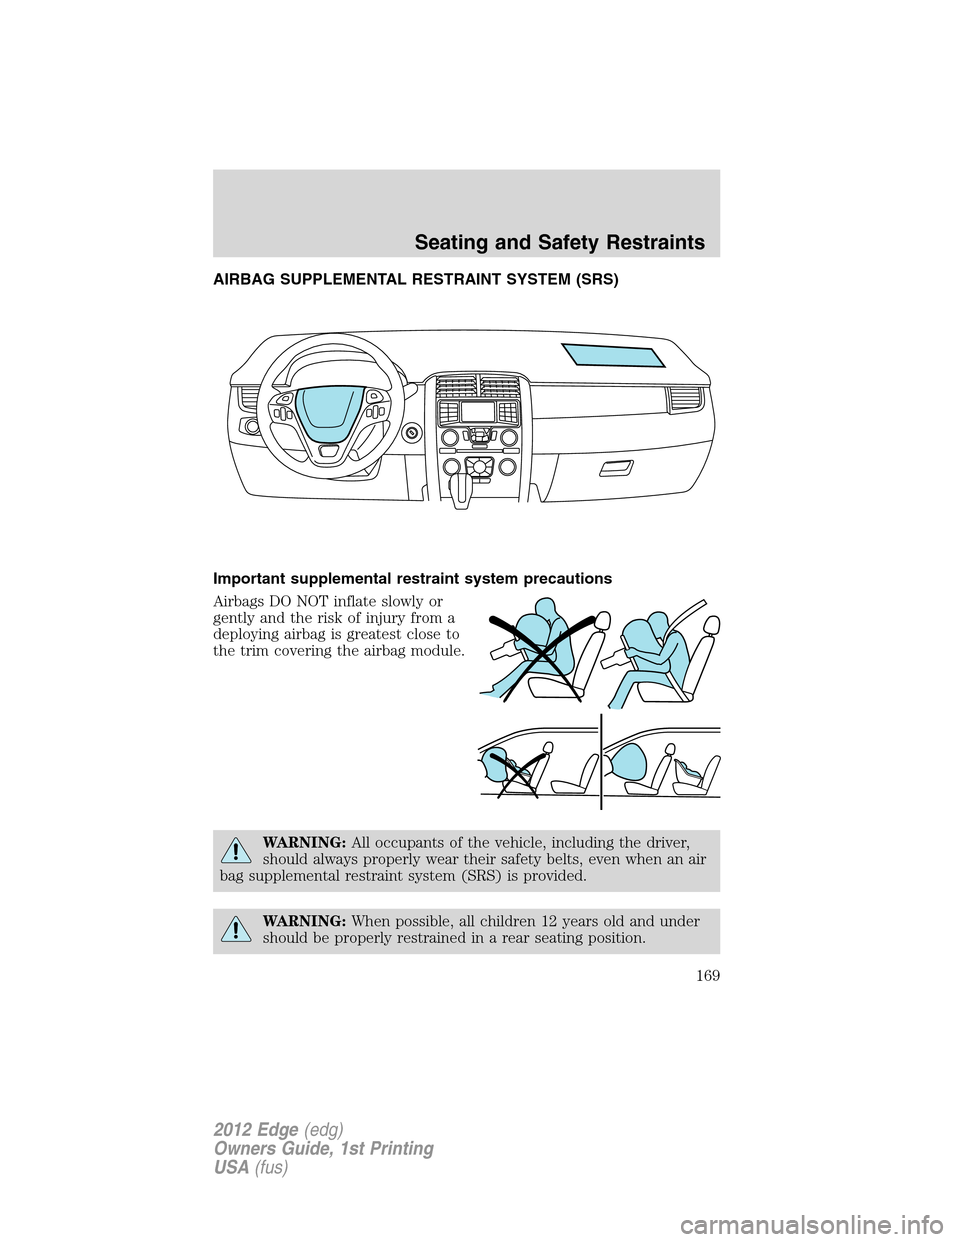 FORD EDGE 2012 1.G User Guide AIRBAG SUPPLEMENTAL RESTRAINT SYSTEM (SRS)
Important supplemental restraint system precautions
Airbags DO NOT inflate slowly or
gently and the risk of injury from a
deploying airbag is greatest close 